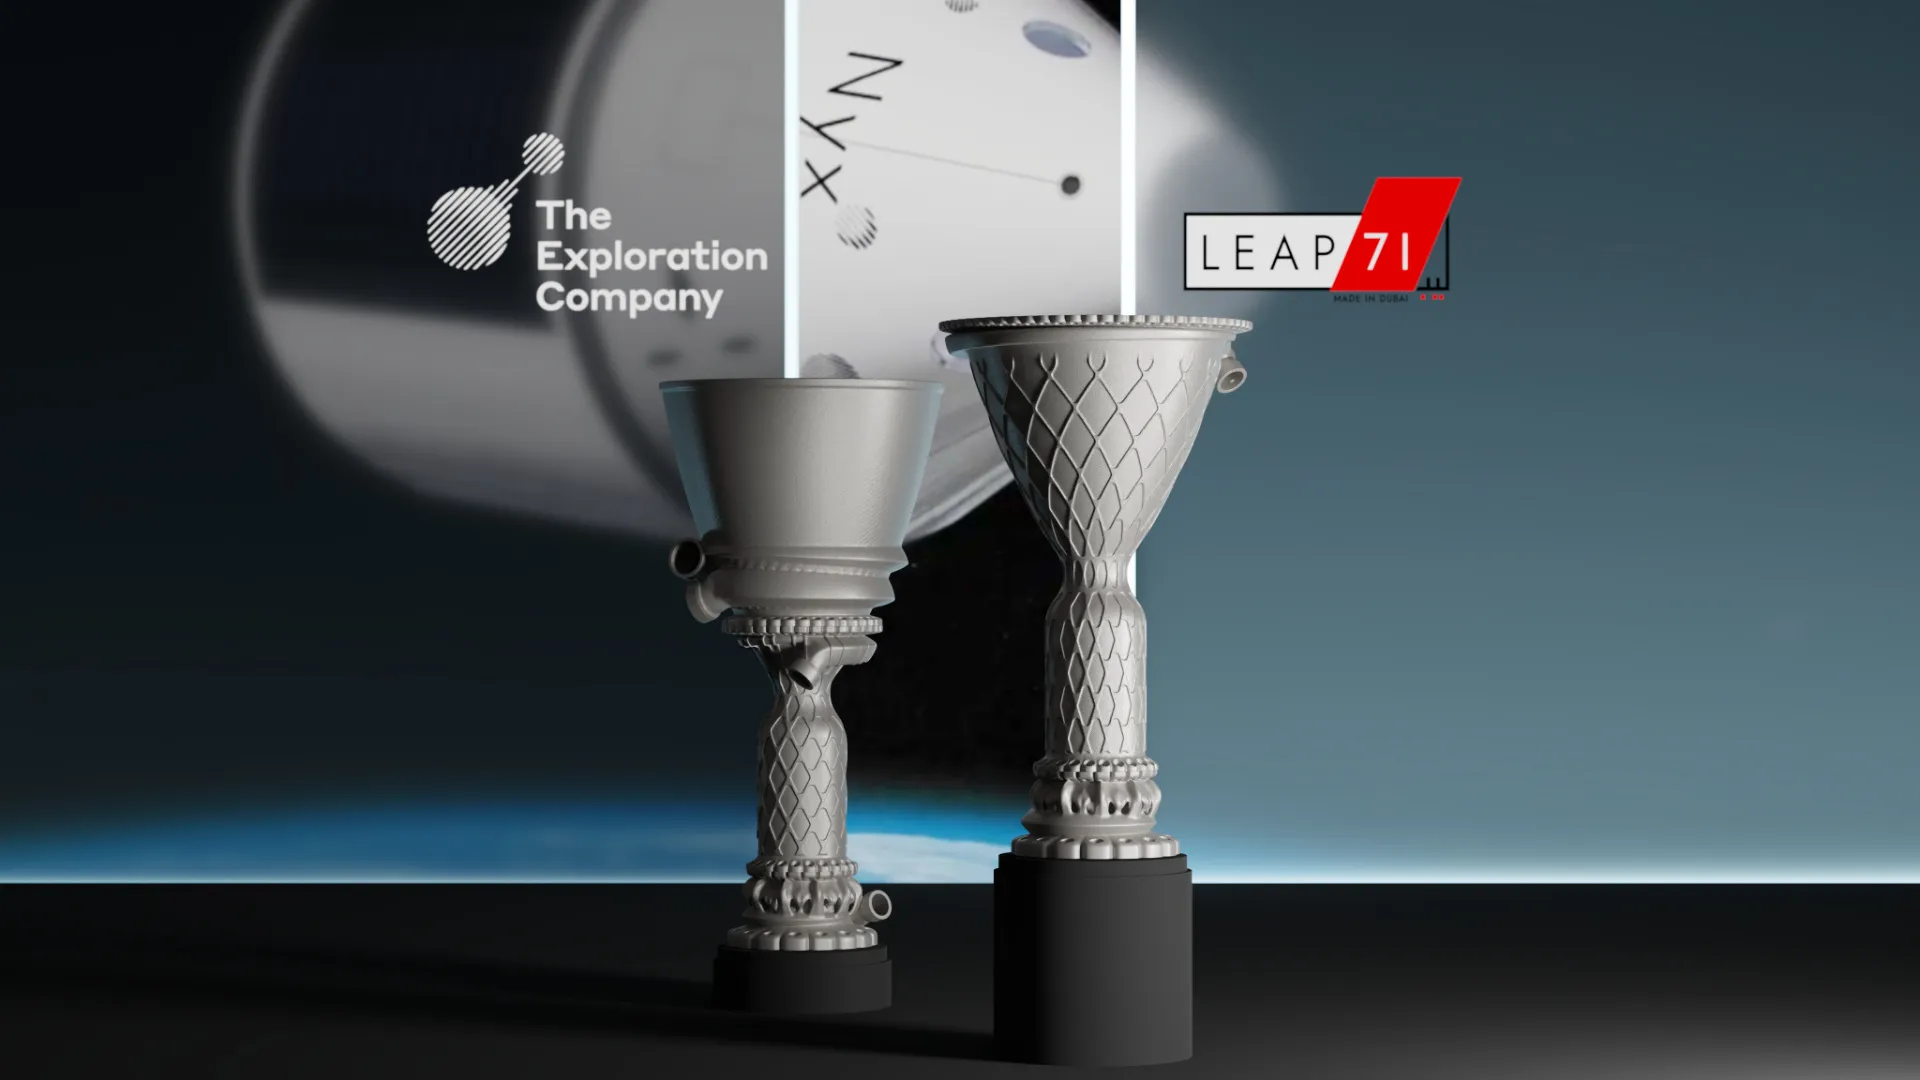 LEAP 71 and The Exploration Company Collaborate to 3D Print Rocket Engines in Dubai